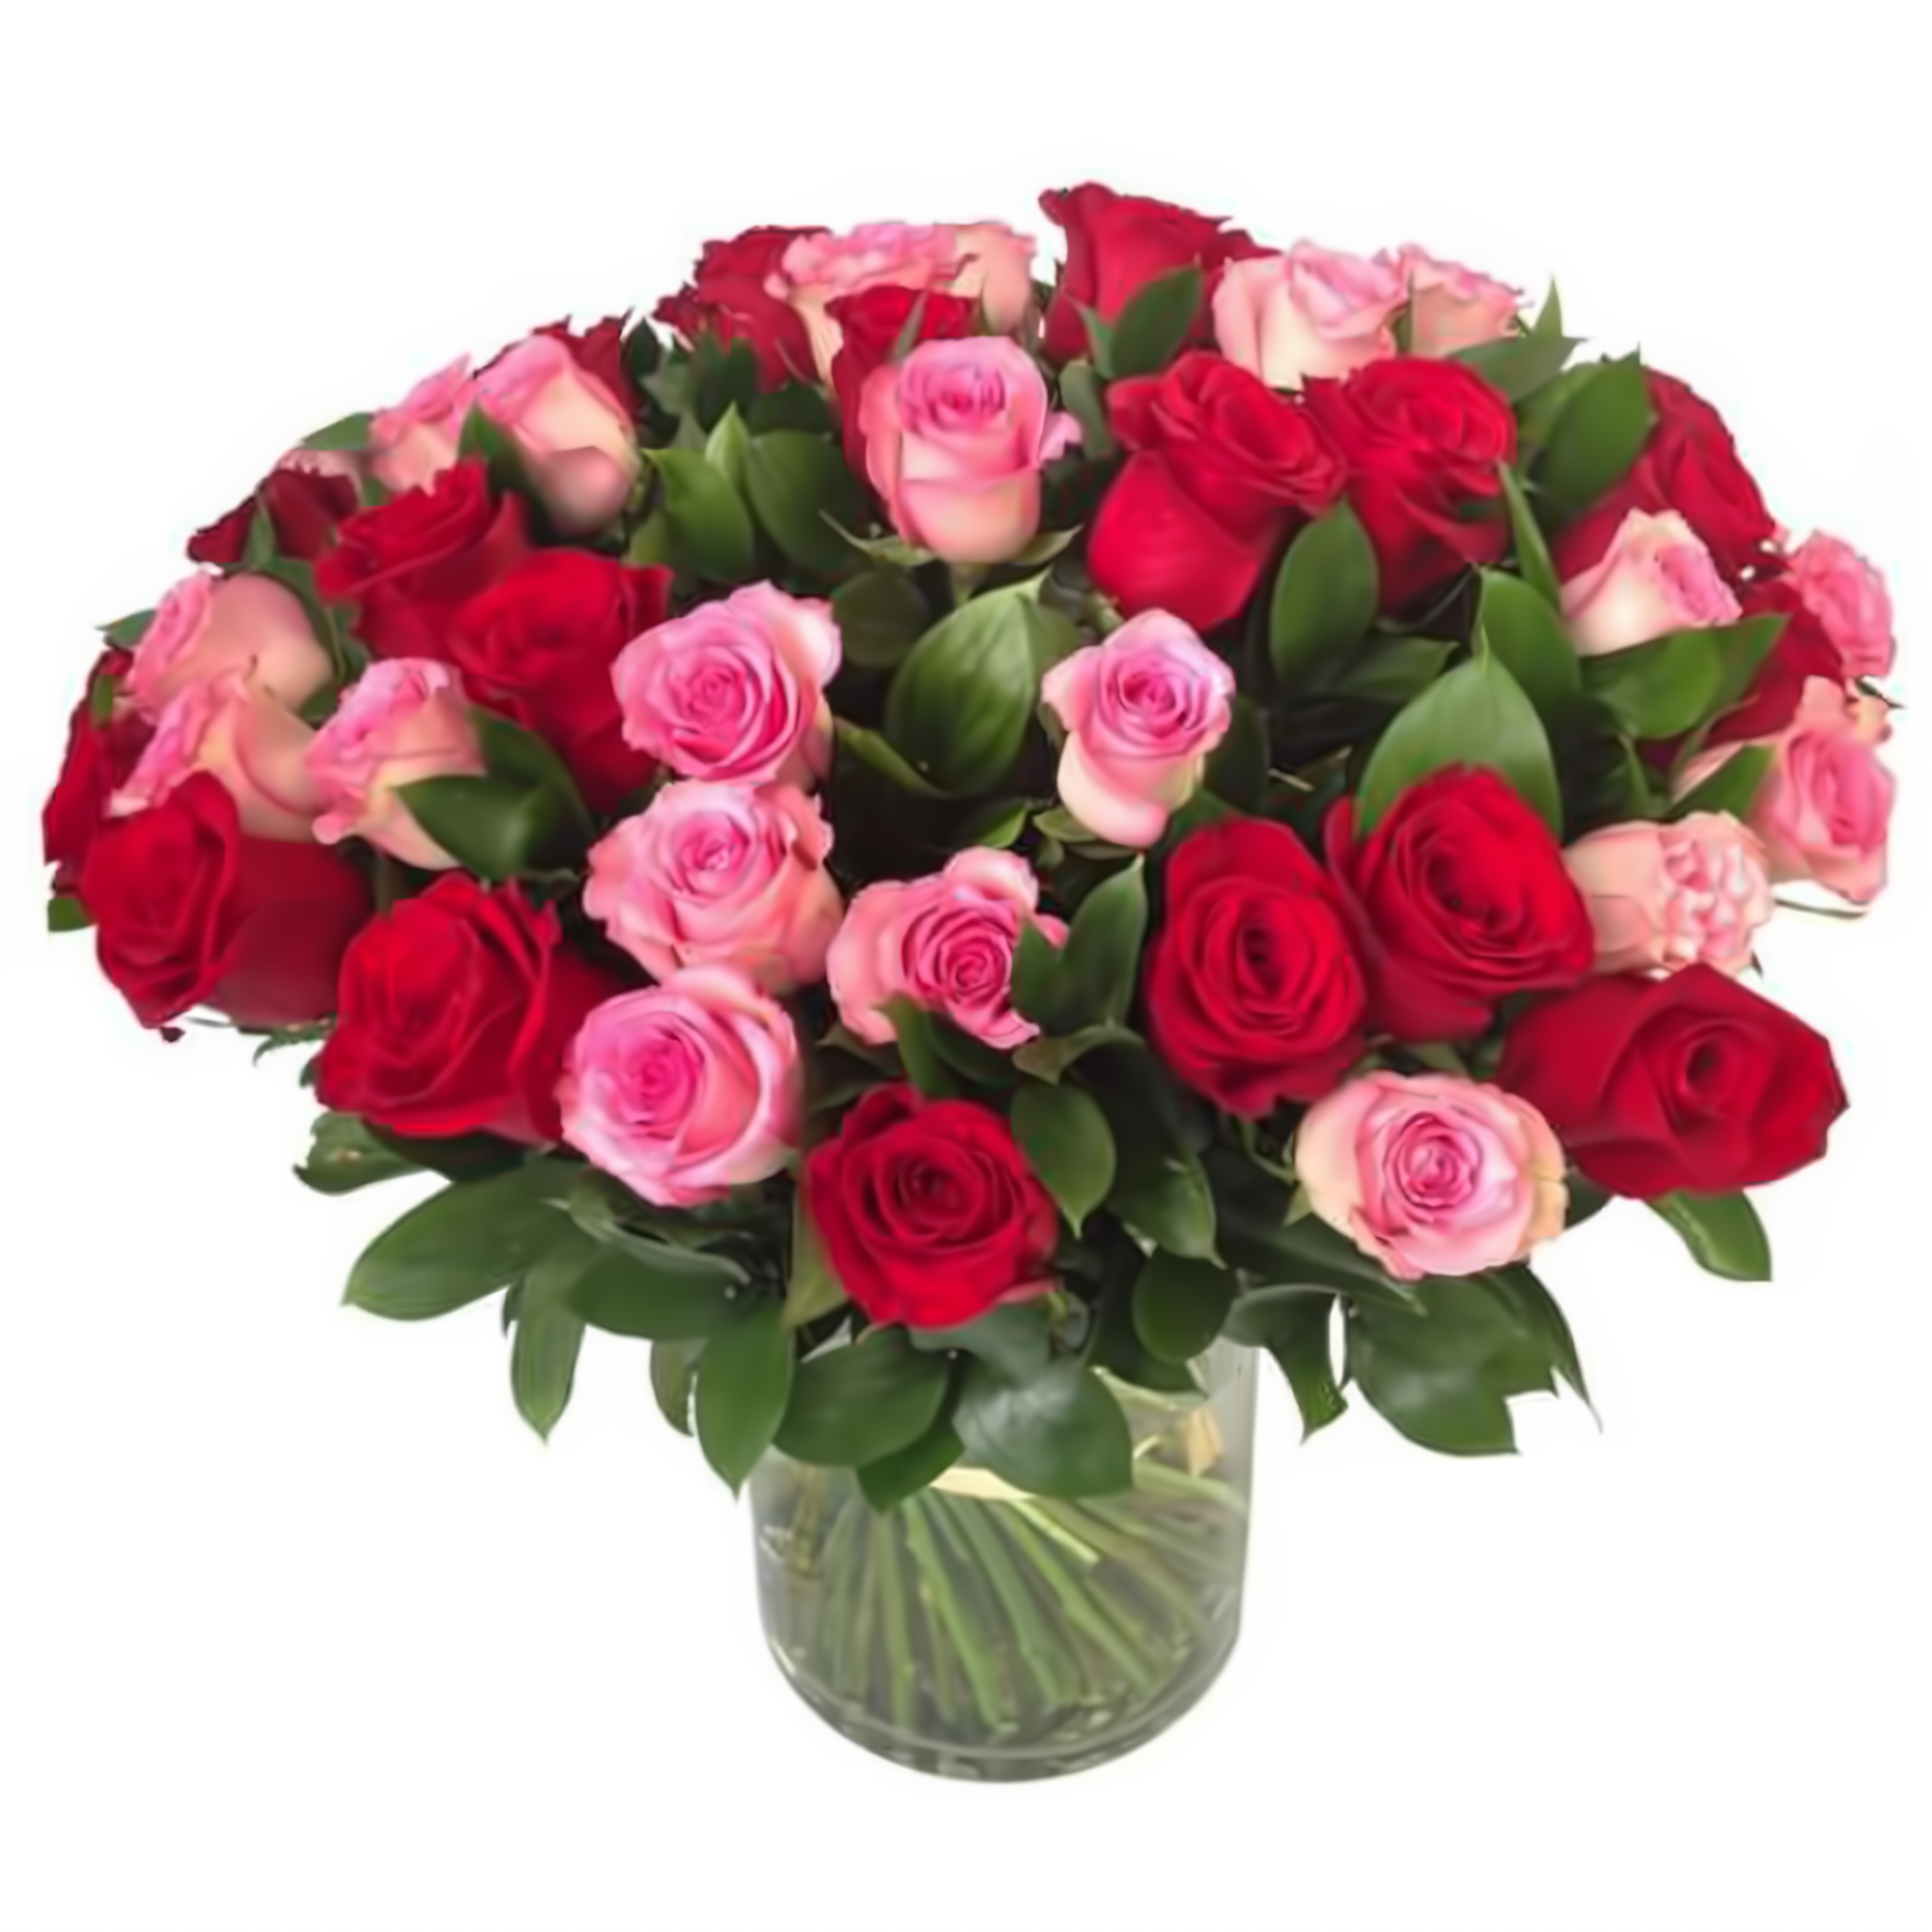 NYC Flower Delivery - 100 Premium Long Stem Red & Pink Rose in a Vase - Valentine's Day